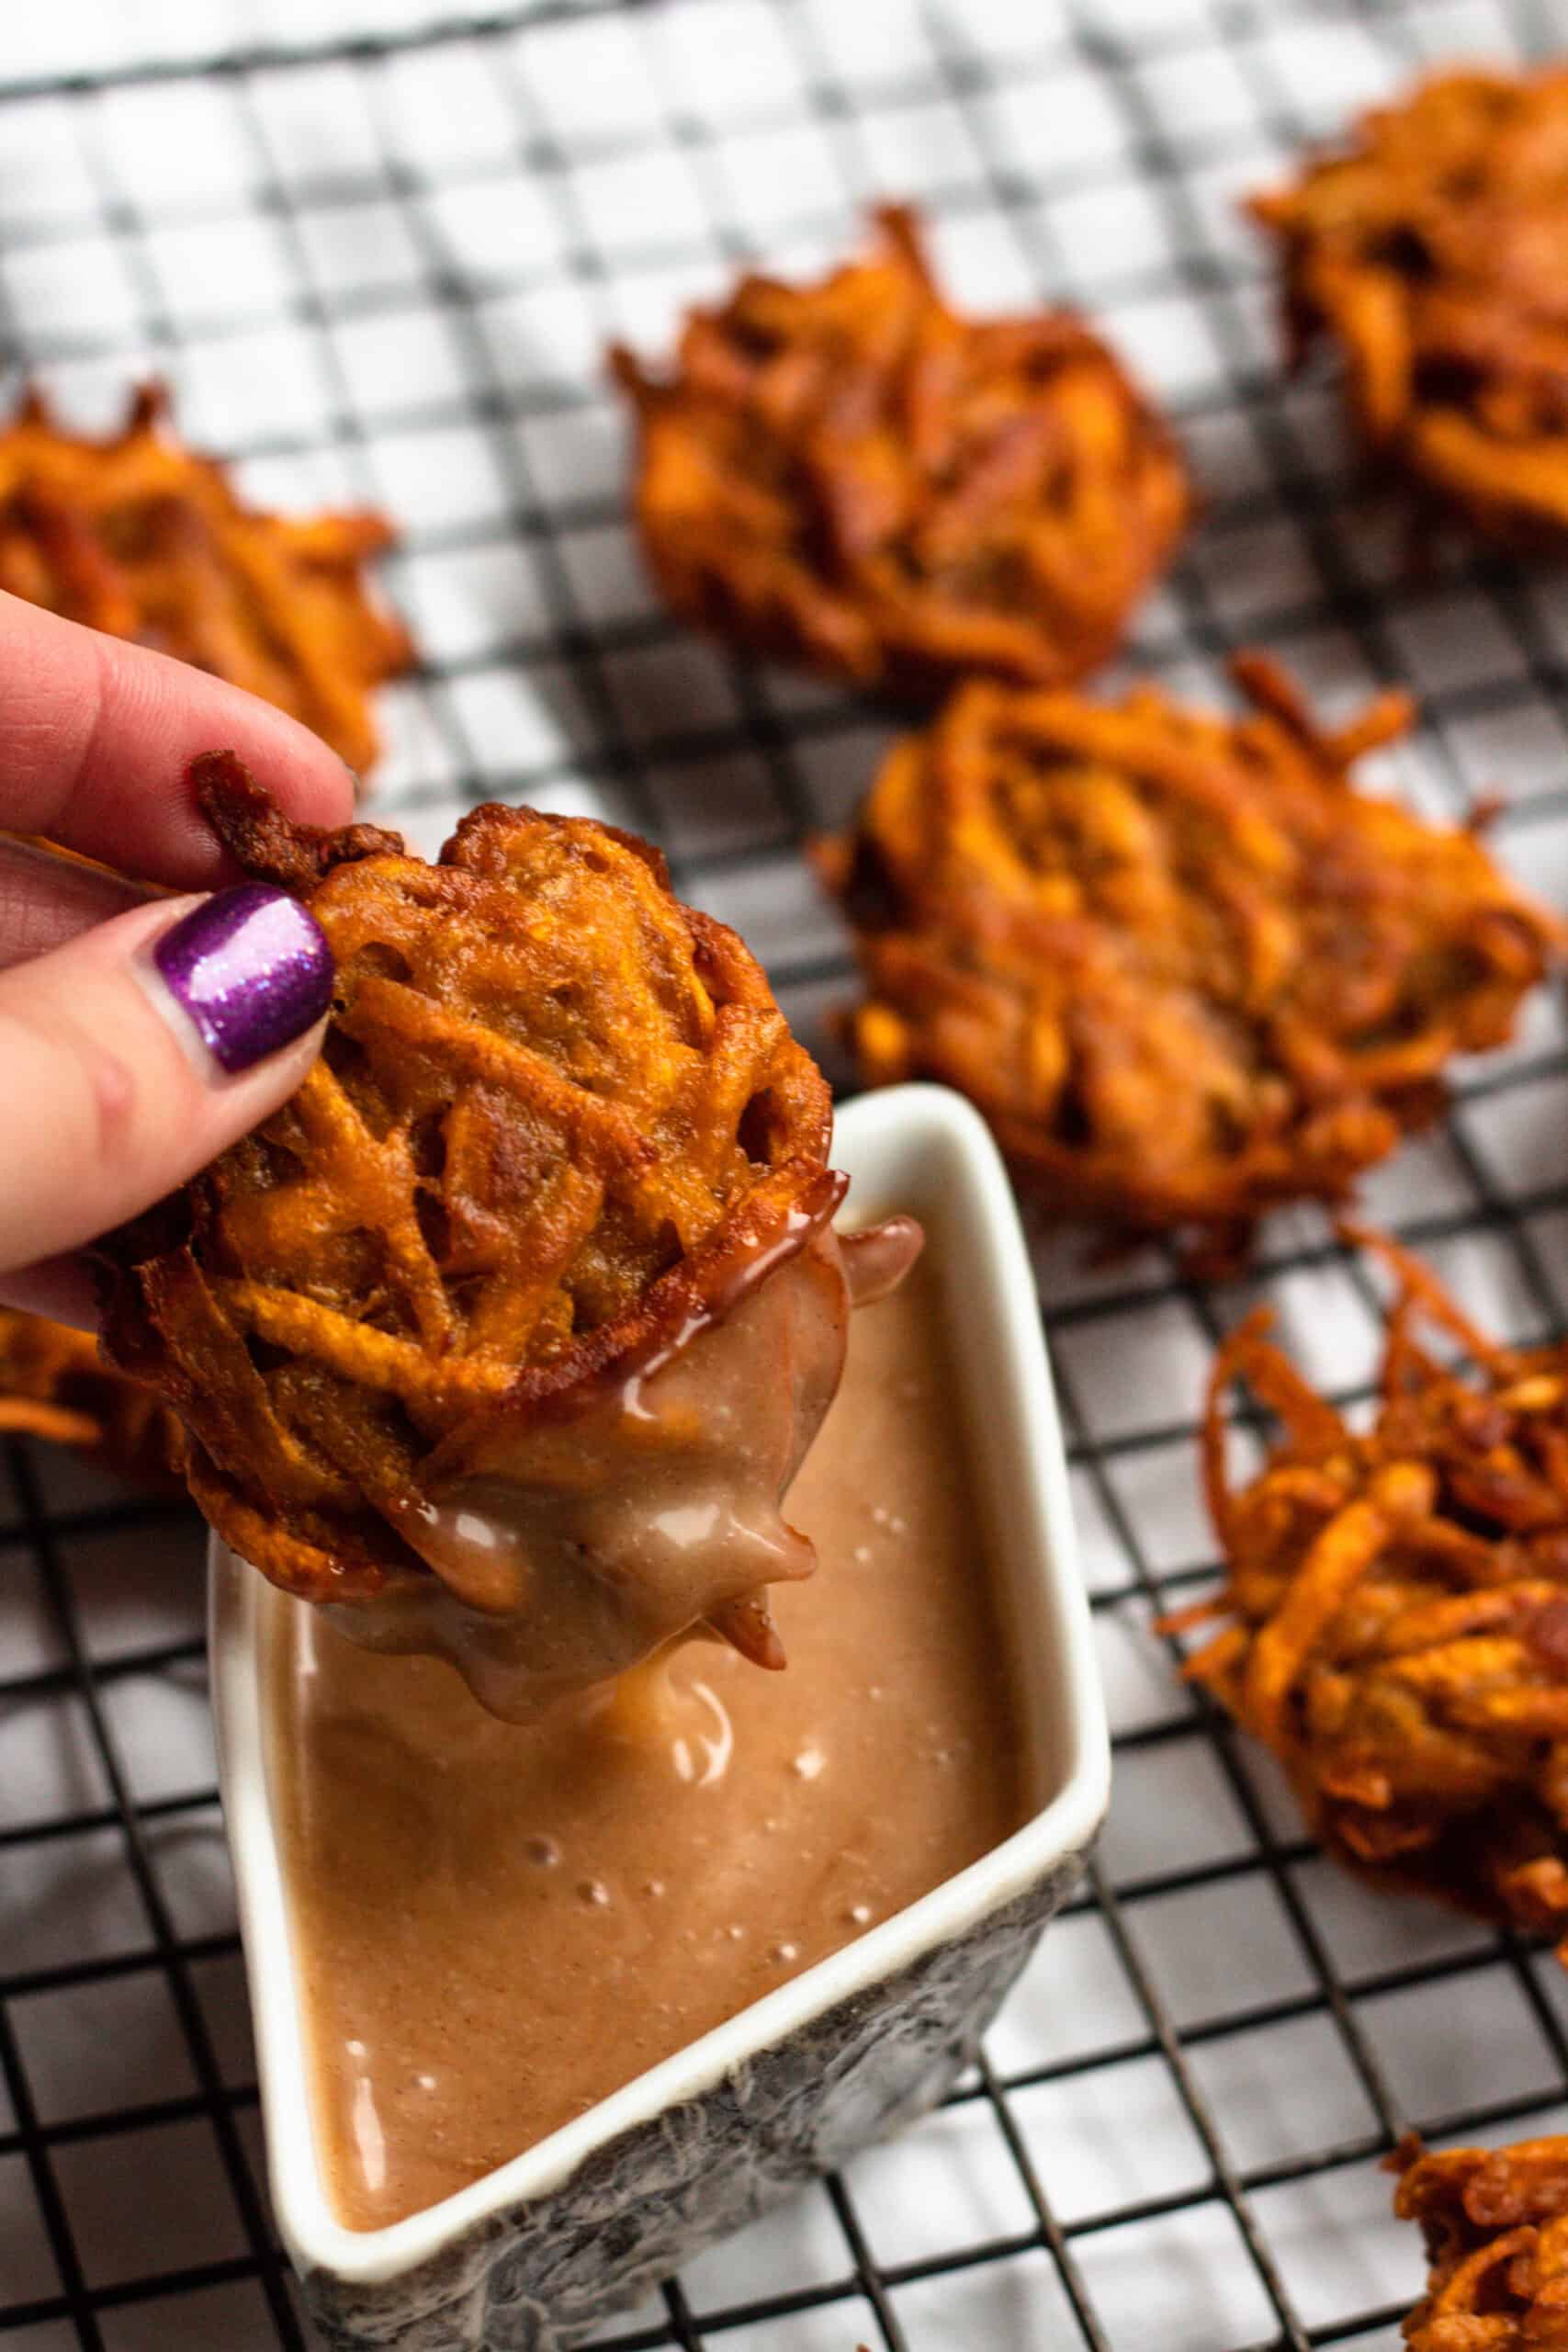 Sweet potato fritters being dipped into a honey mayonnaise dip.